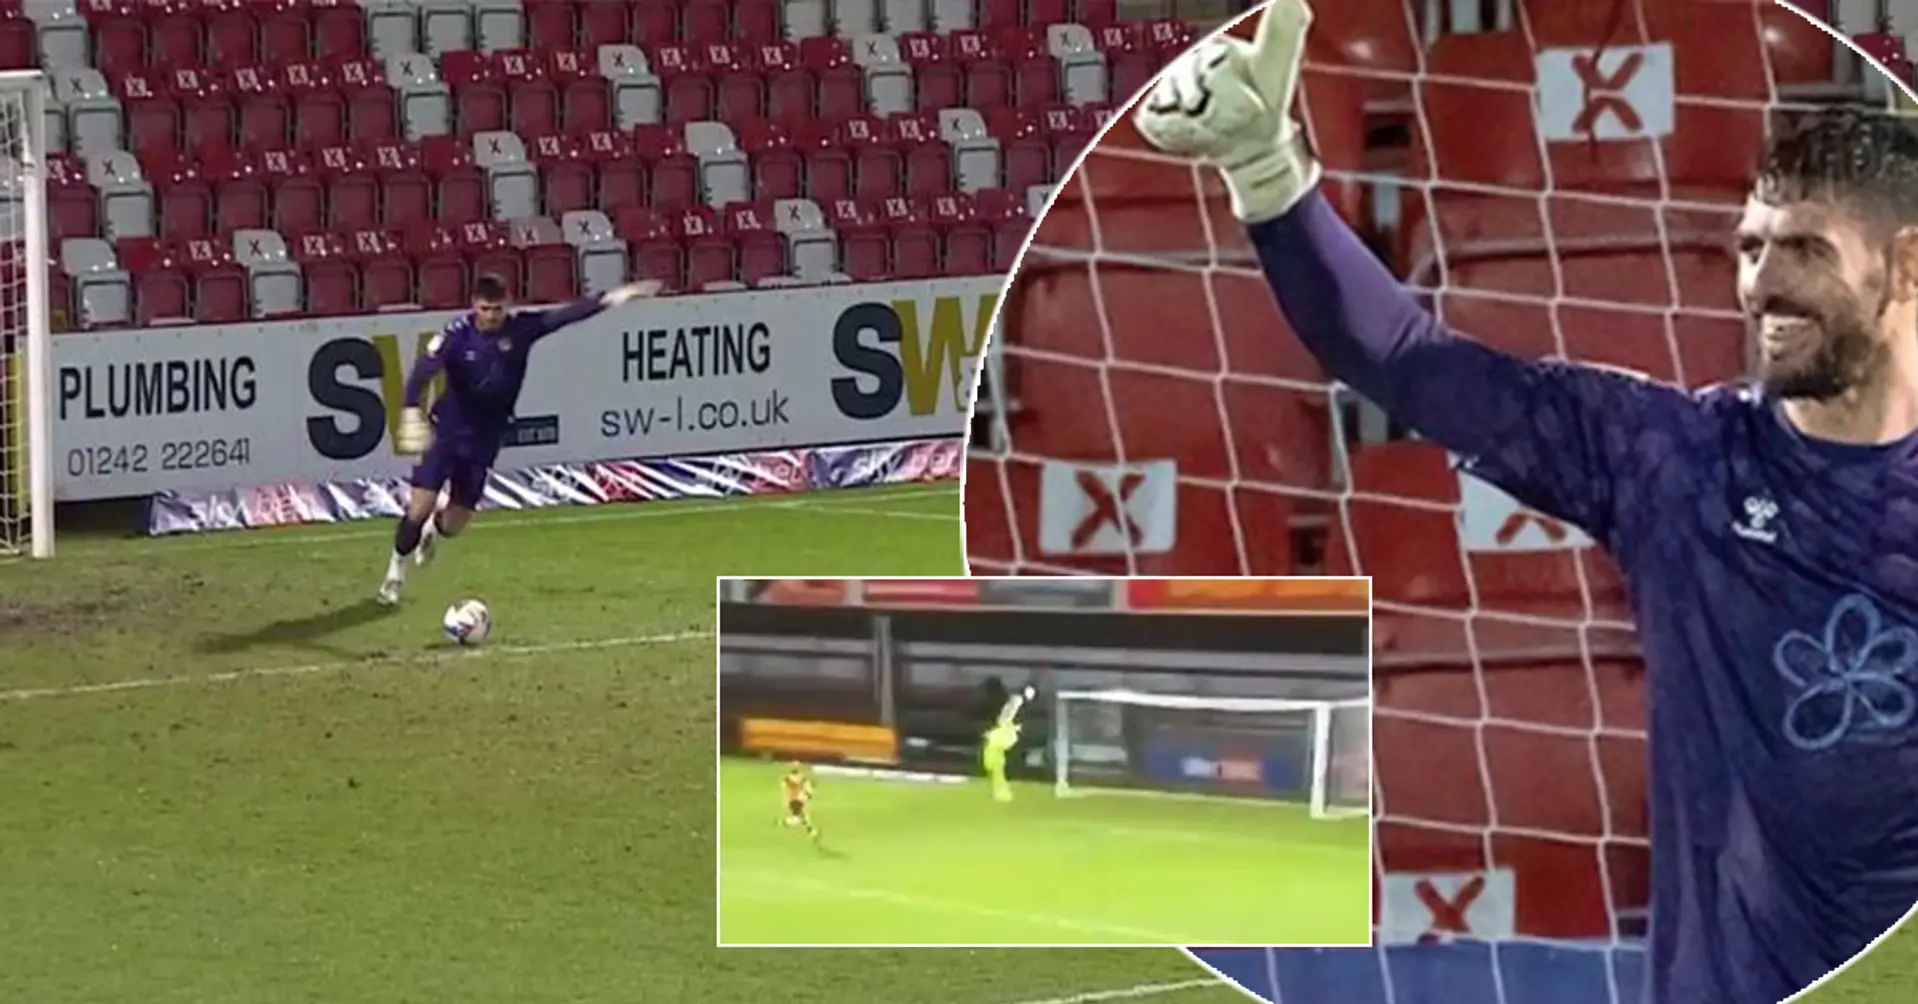 🌍 Global Watch: English goalkeeper embarrasses rivals, scores from his own penalty area with crazy shot 